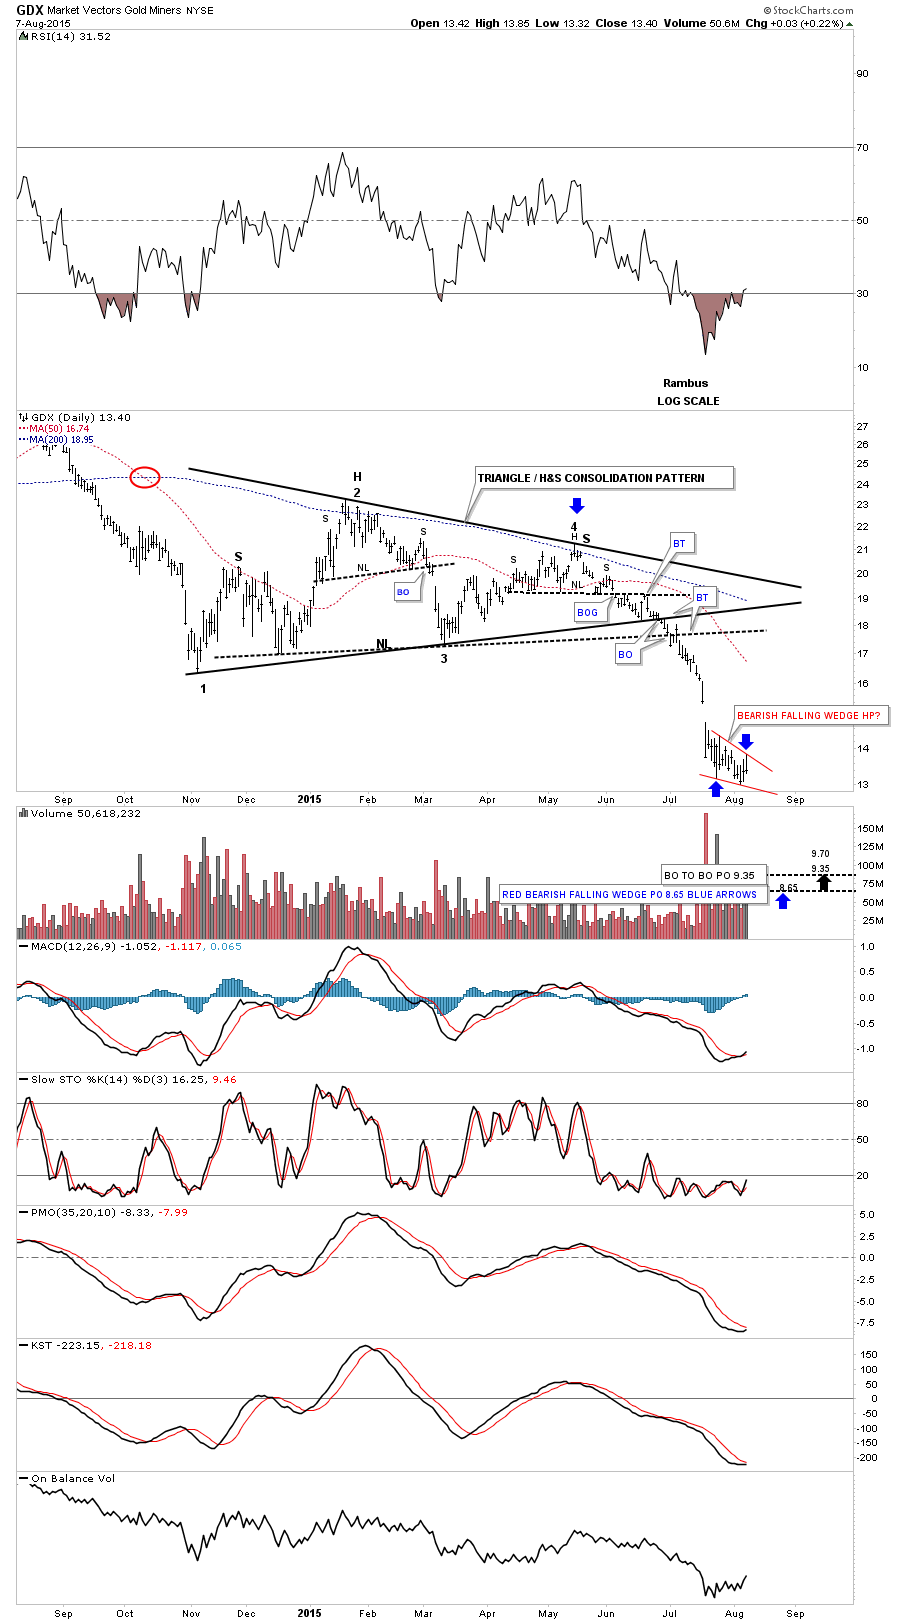 GDX Daily 1-Y View